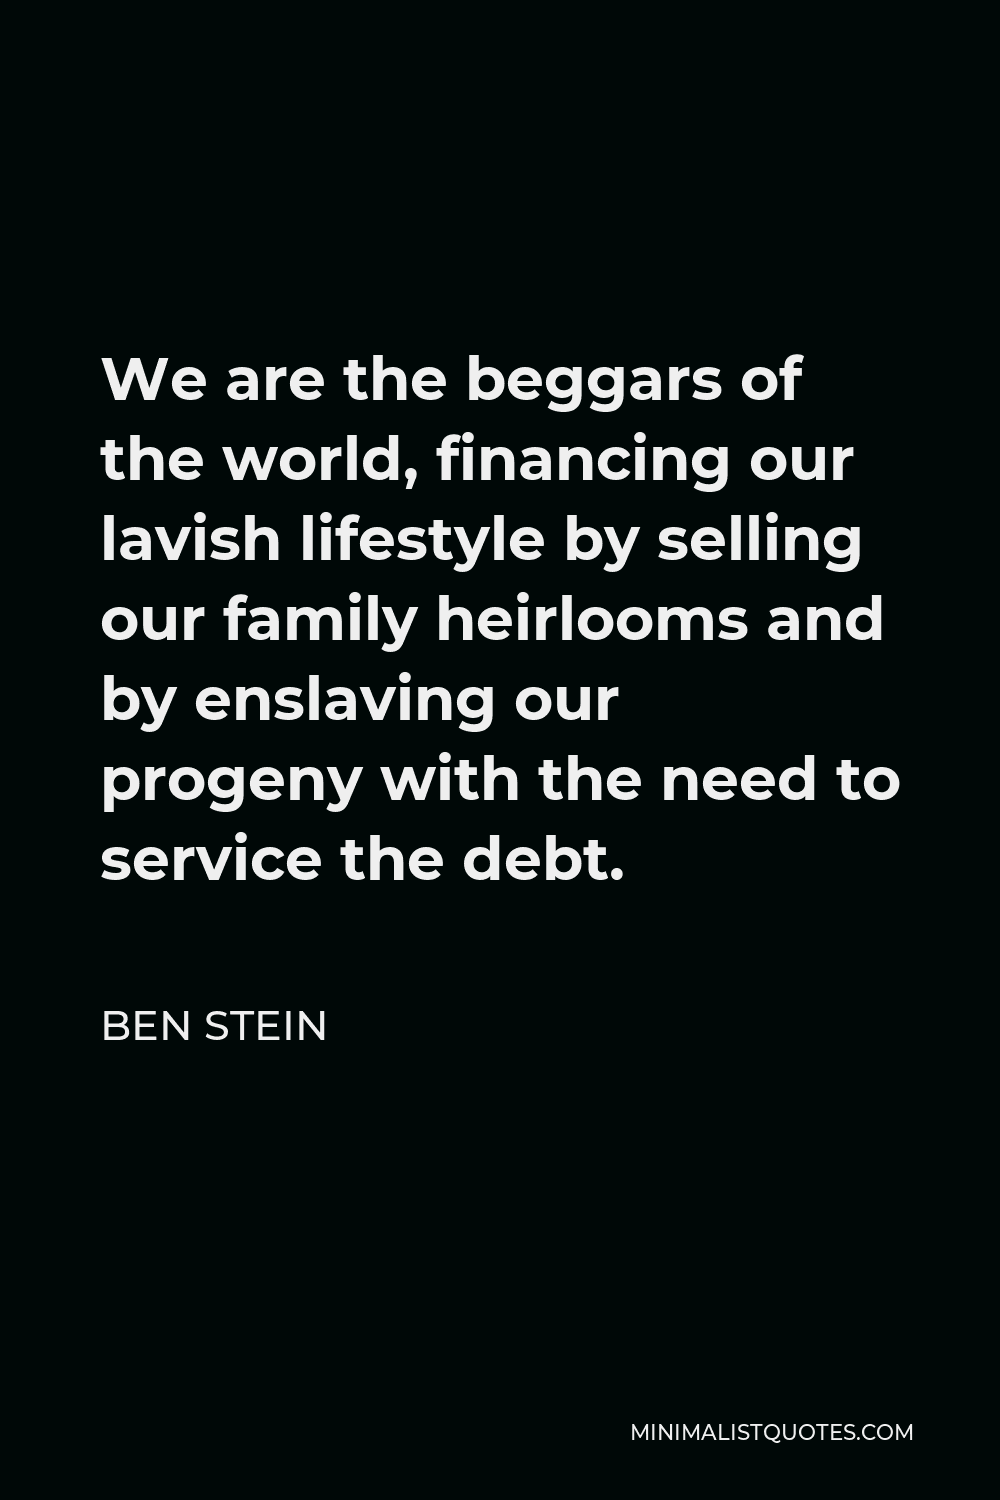 Ben Stein Quote - We are the beggars of the world, financing our lavish lifestyle by selling our family heirlooms and by enslaving our progeny with the need to service the debt.